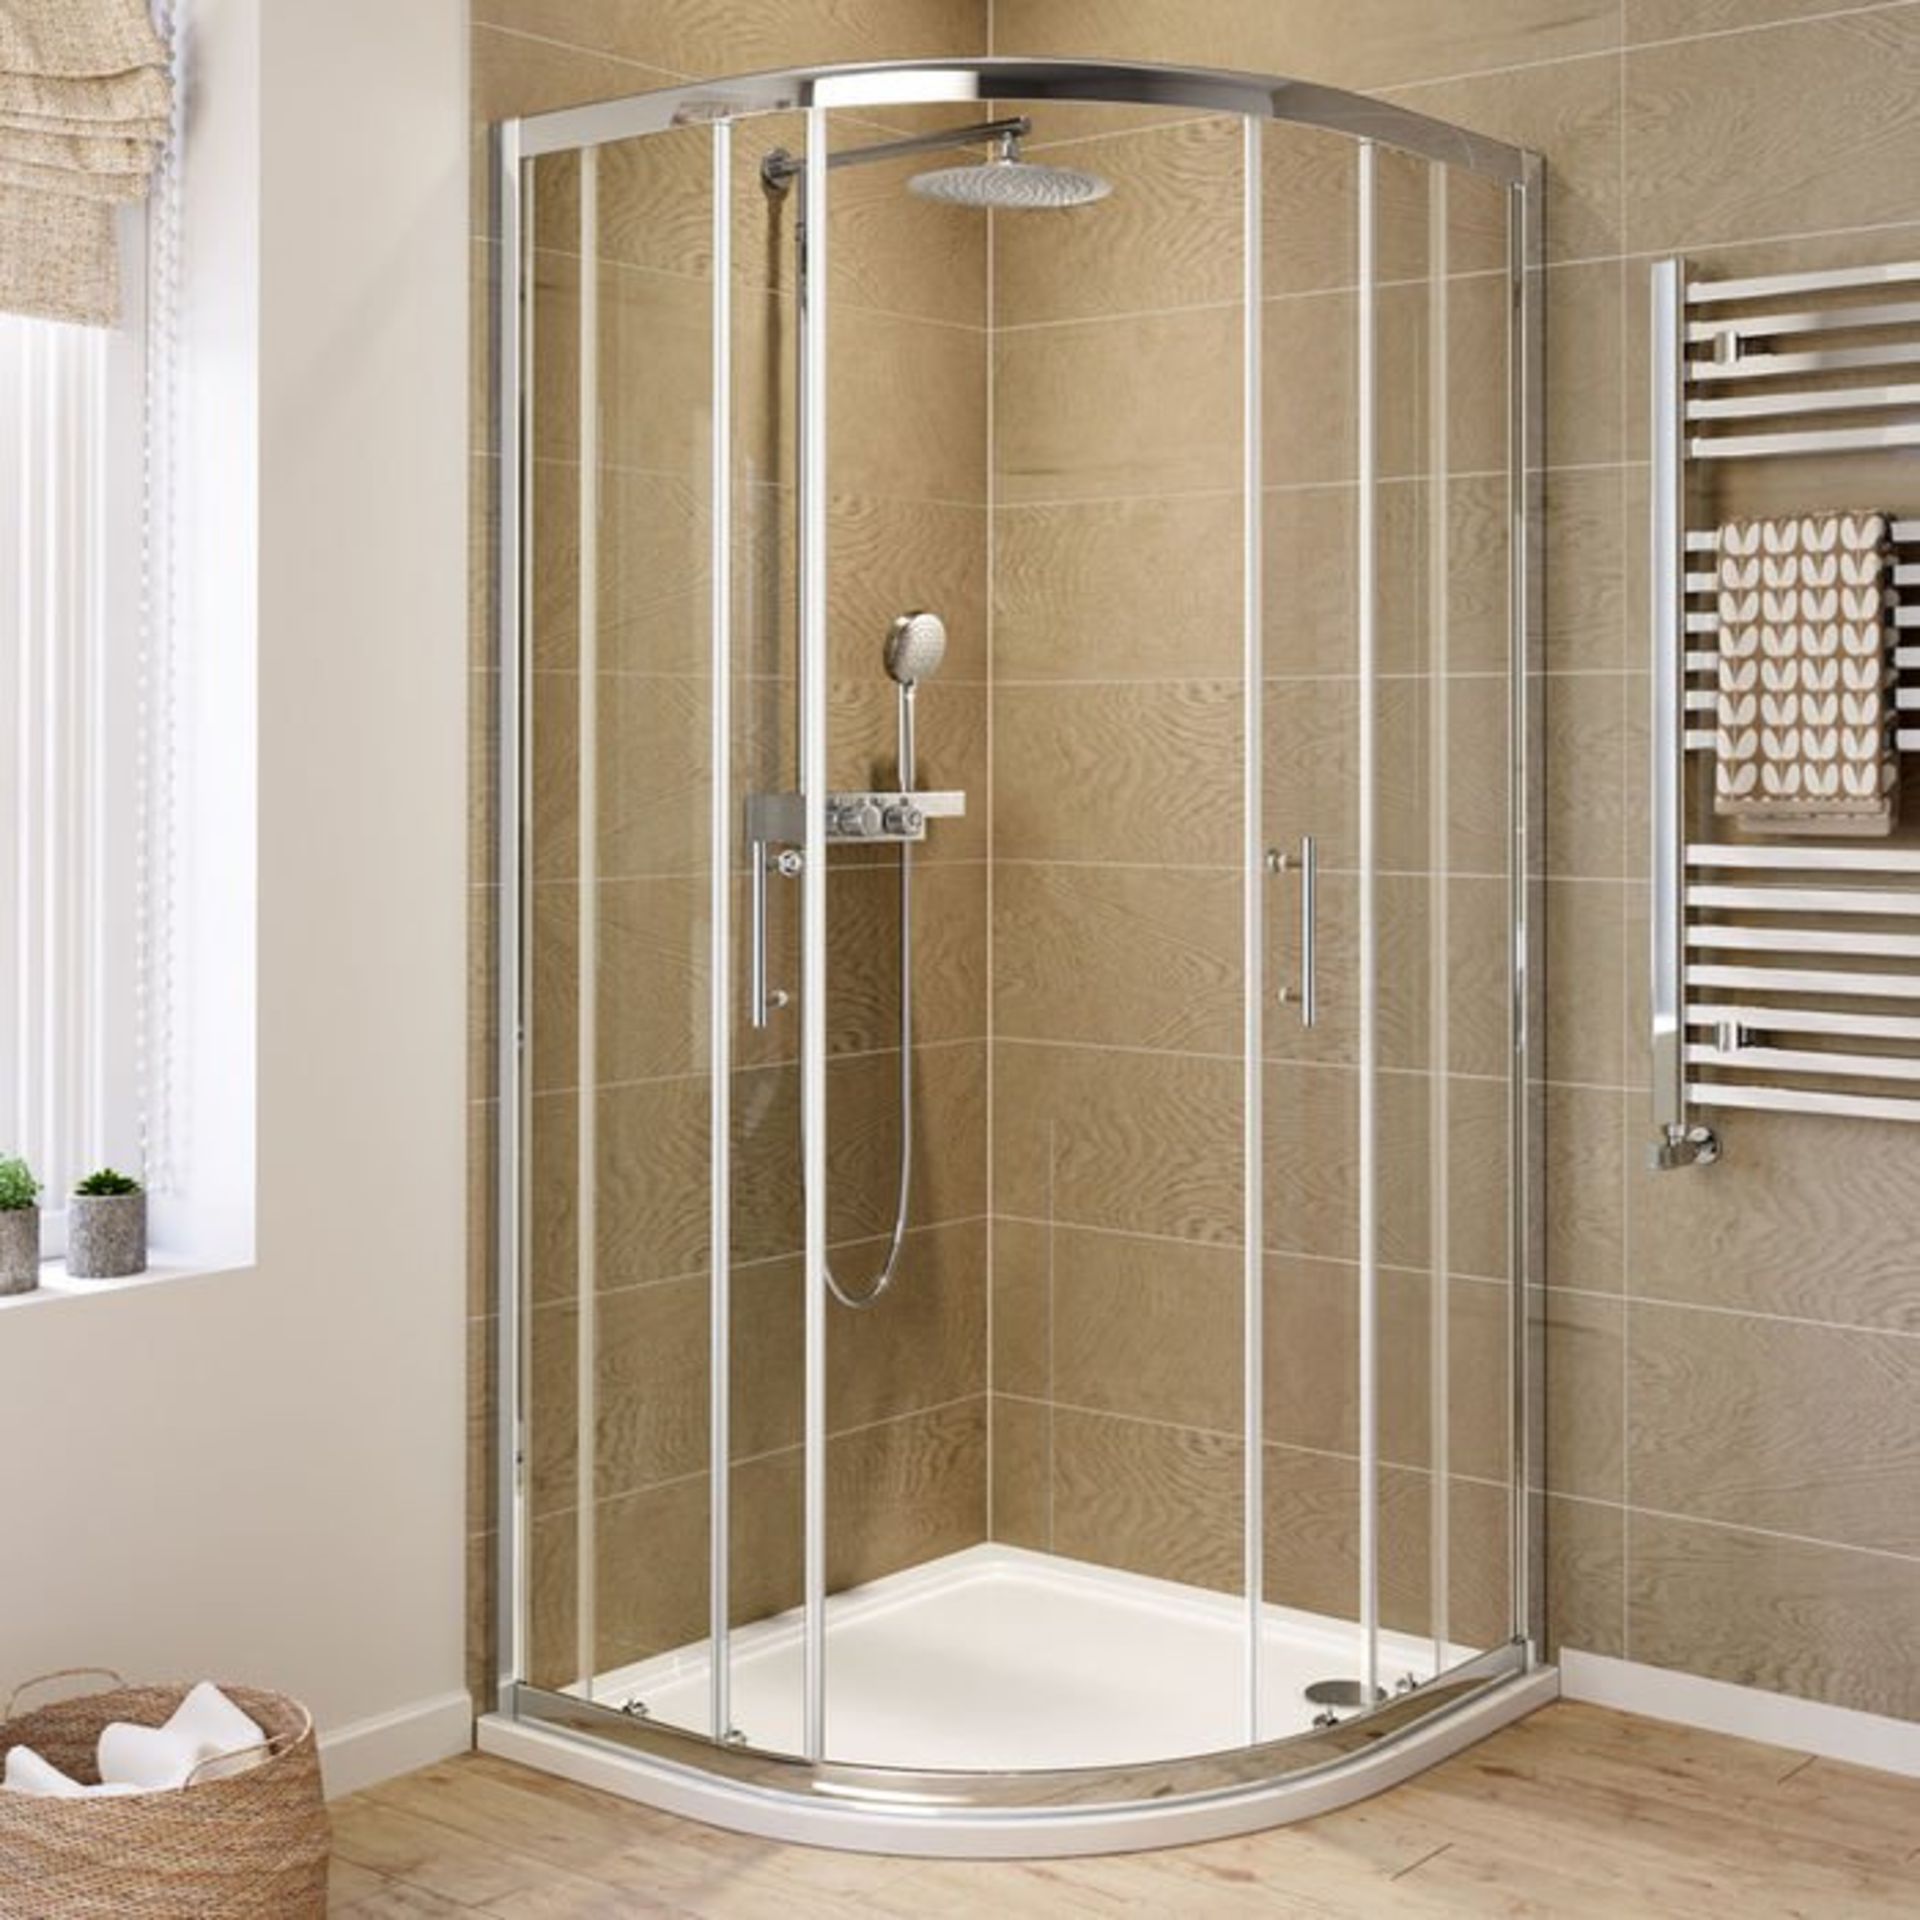 (H159) 800x800mm - 6mm - Elements Quadrant Shower Enclosure. RRP £272.99. 6mm Safety Glass Fully